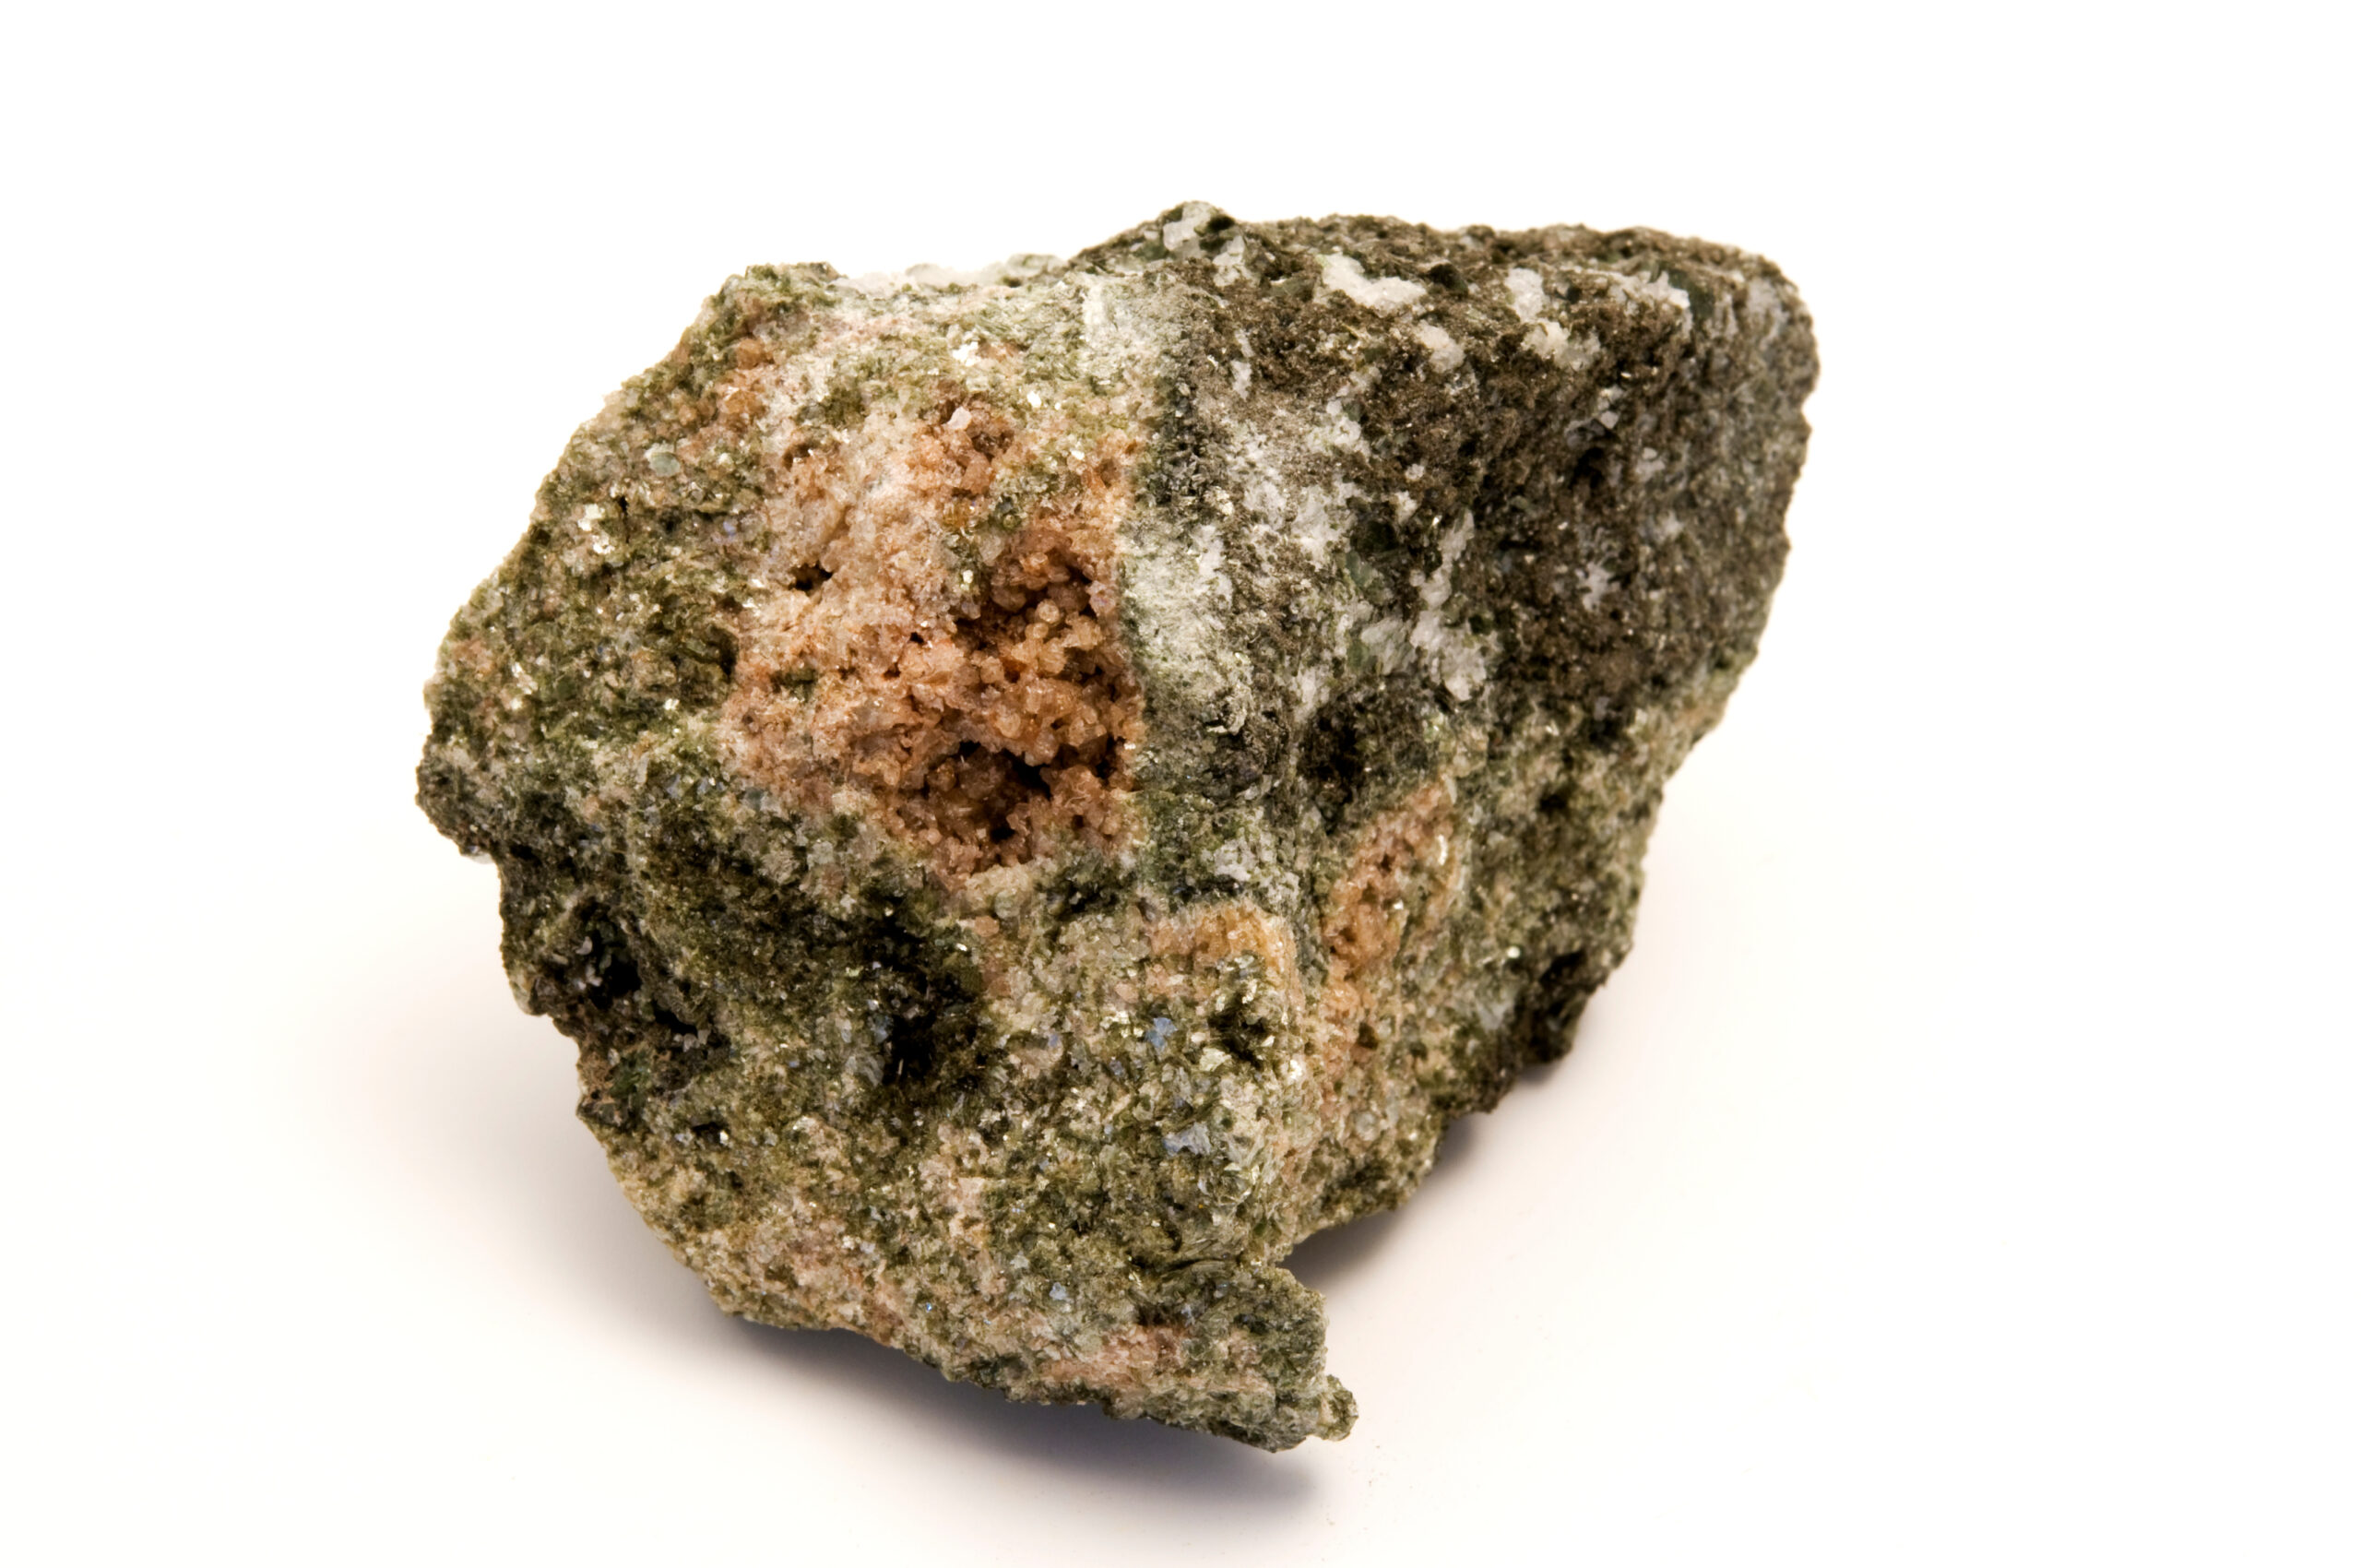 Zinnwaldite is the historical source of Lithium, from which Lithium Hydroxide can be refined and used in a wide range of applications